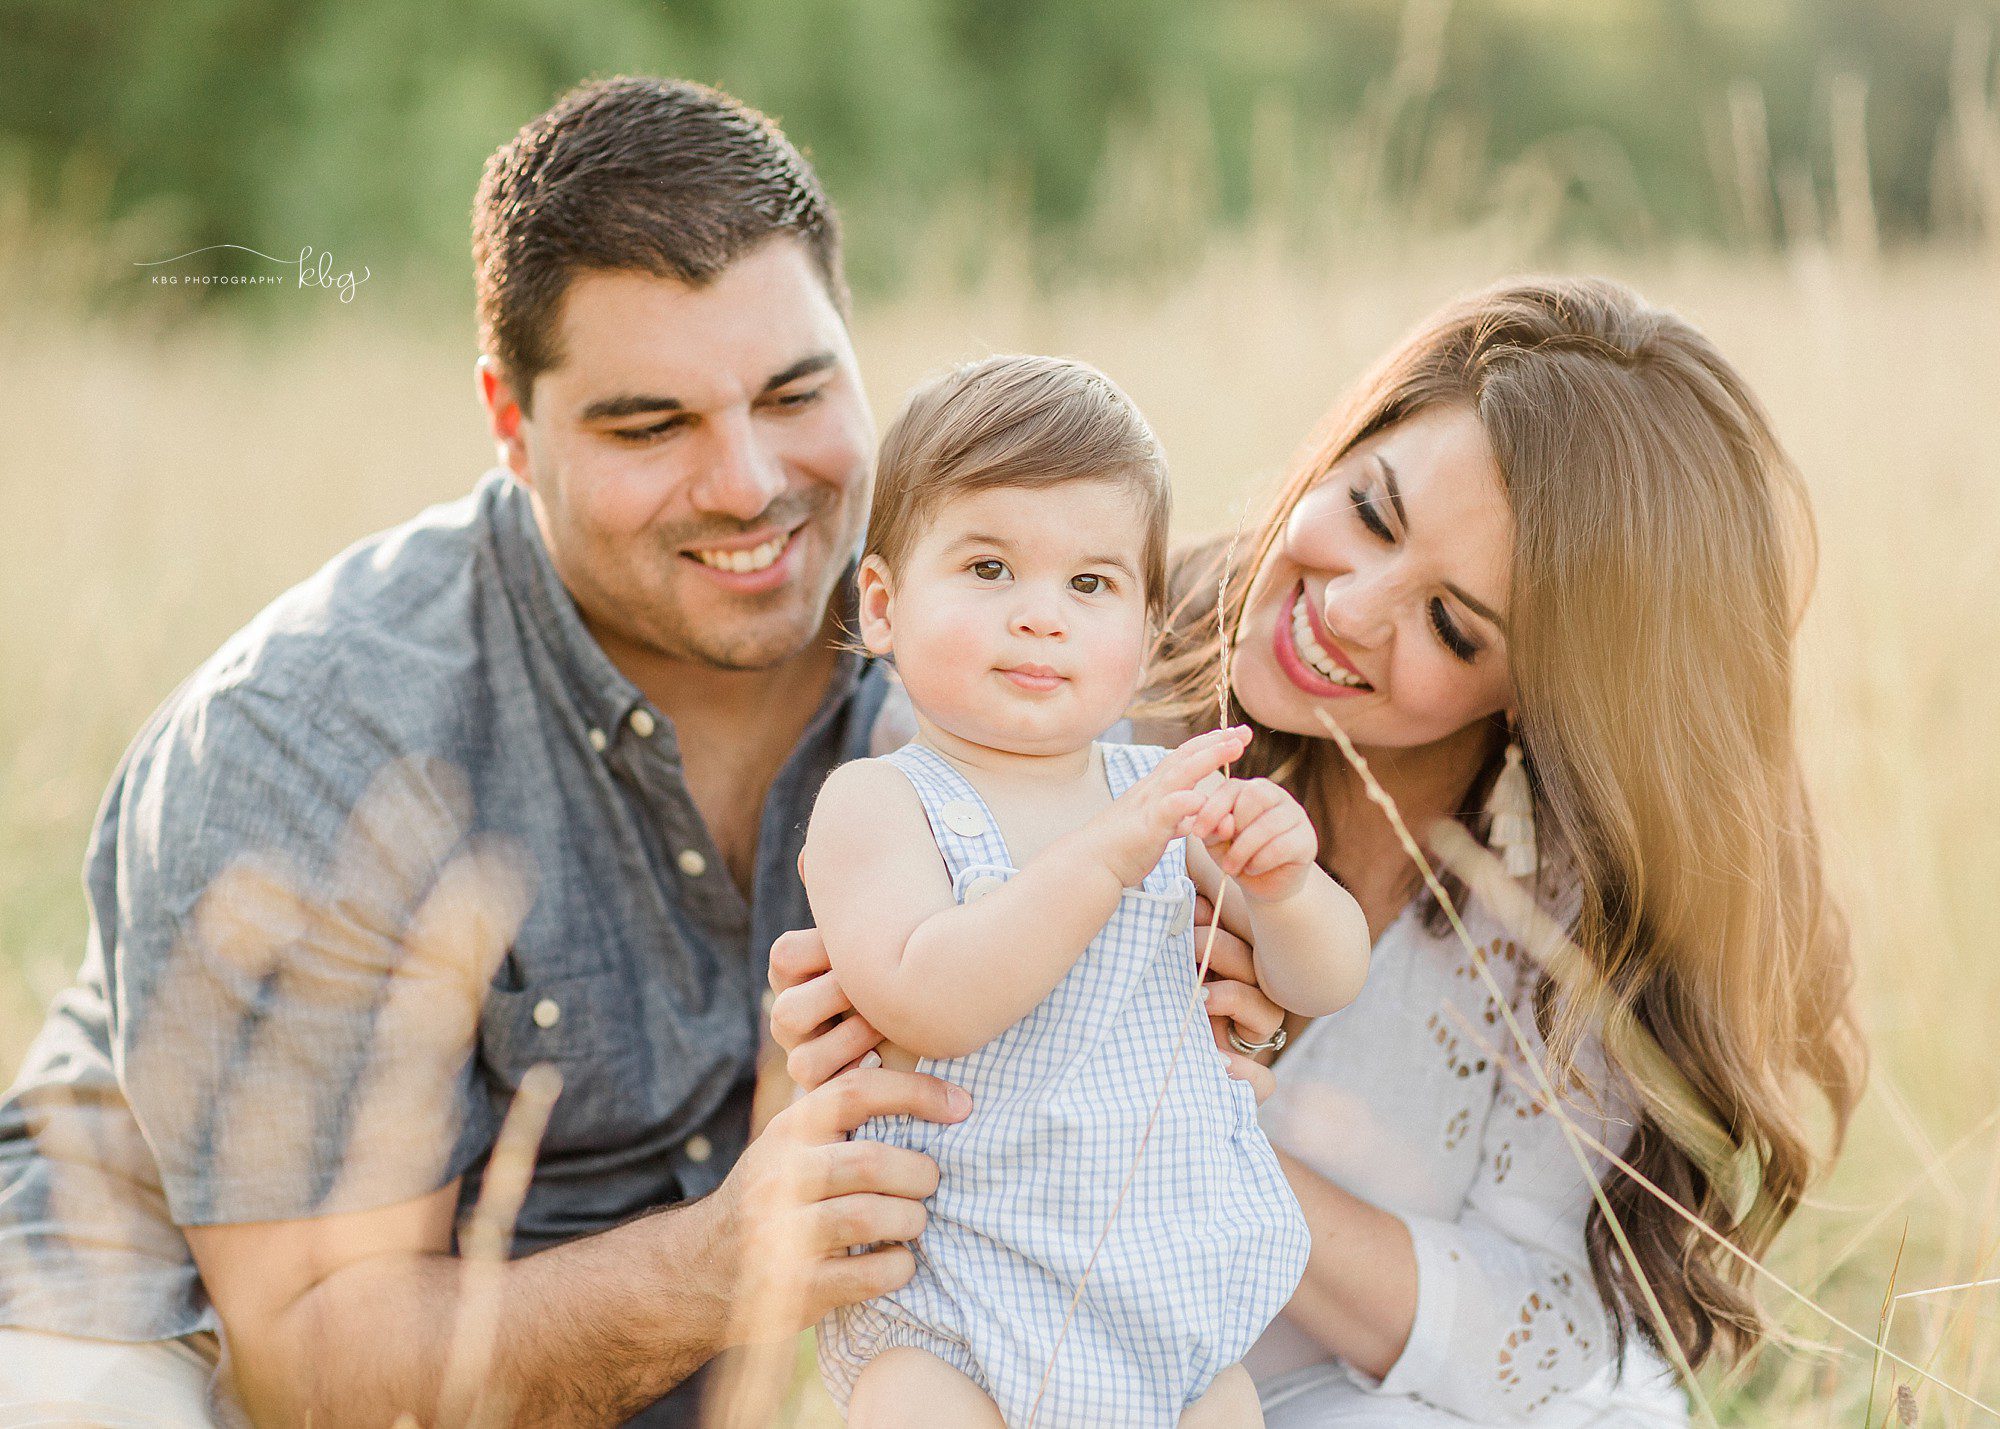 marietta family photographer - family portrait - family of three smiling together in a field